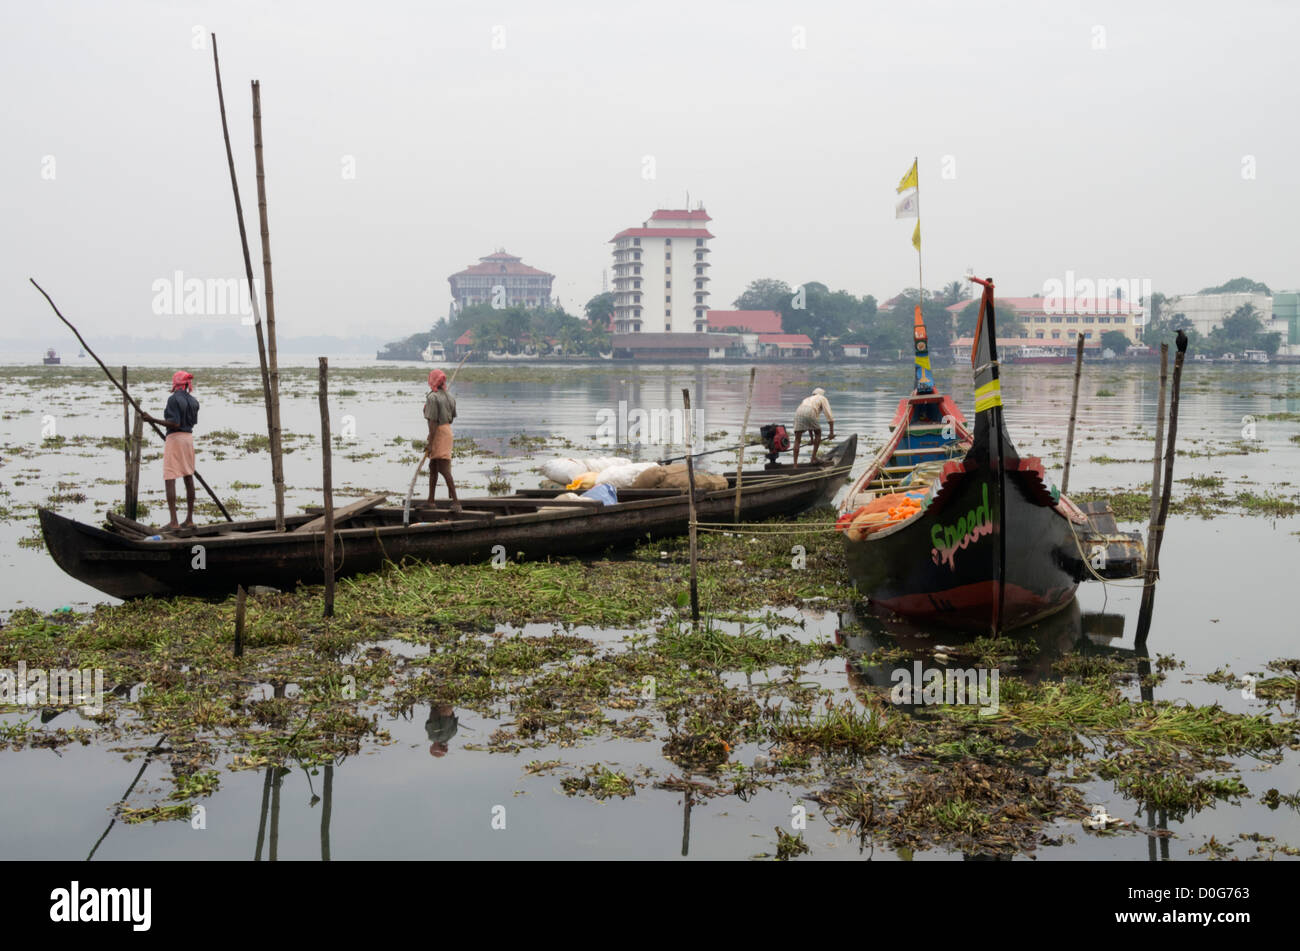 Fishing boats in Cochin Kerala India surrounded by water hyacinth weeds Stock Photo